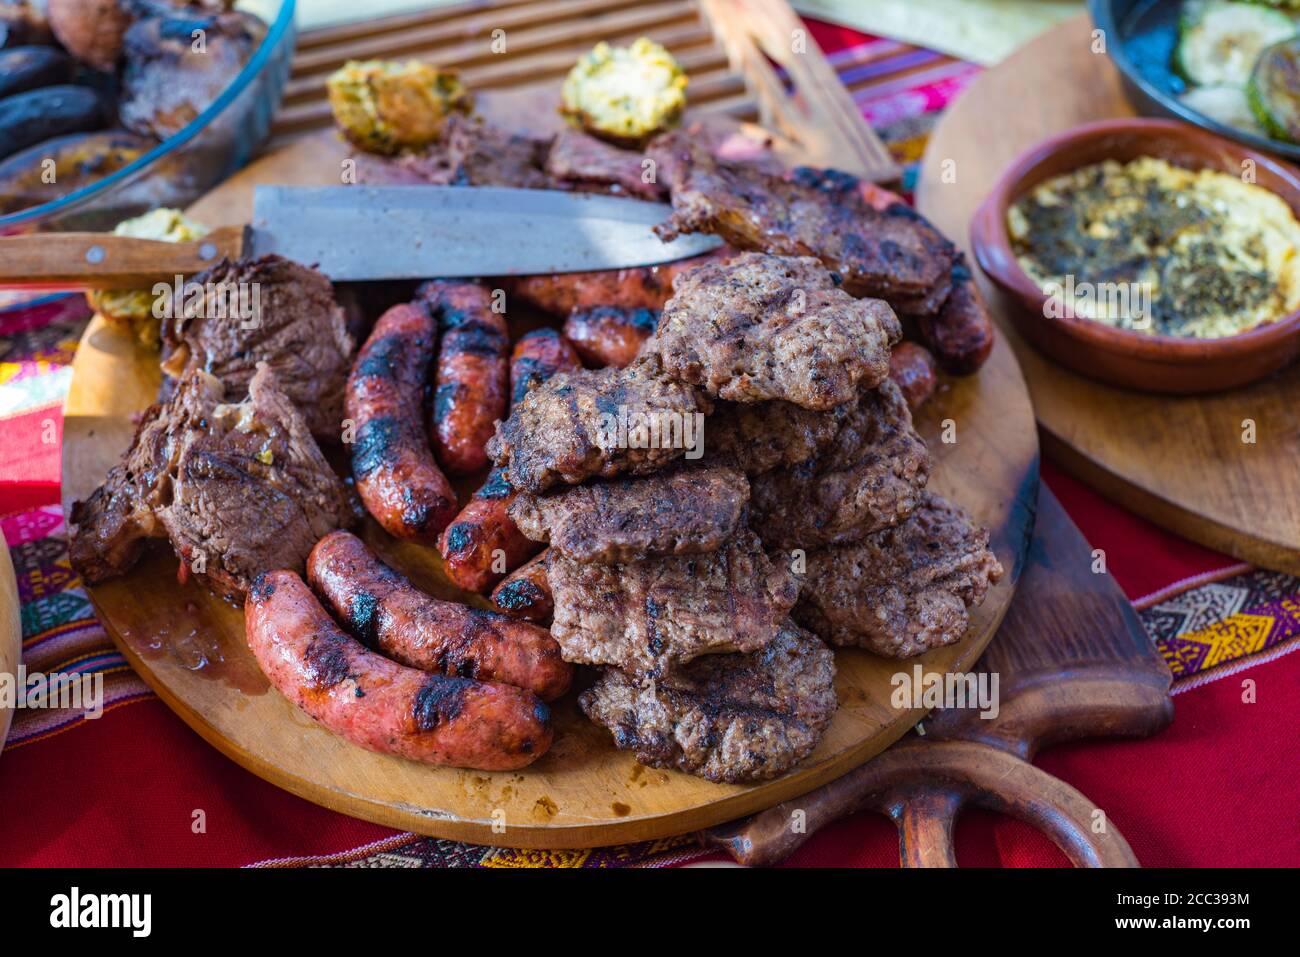 A mixture of grilled meats on a wood board. Barbecue meat on a table with a Peruvian style table cloth. Stock Photo